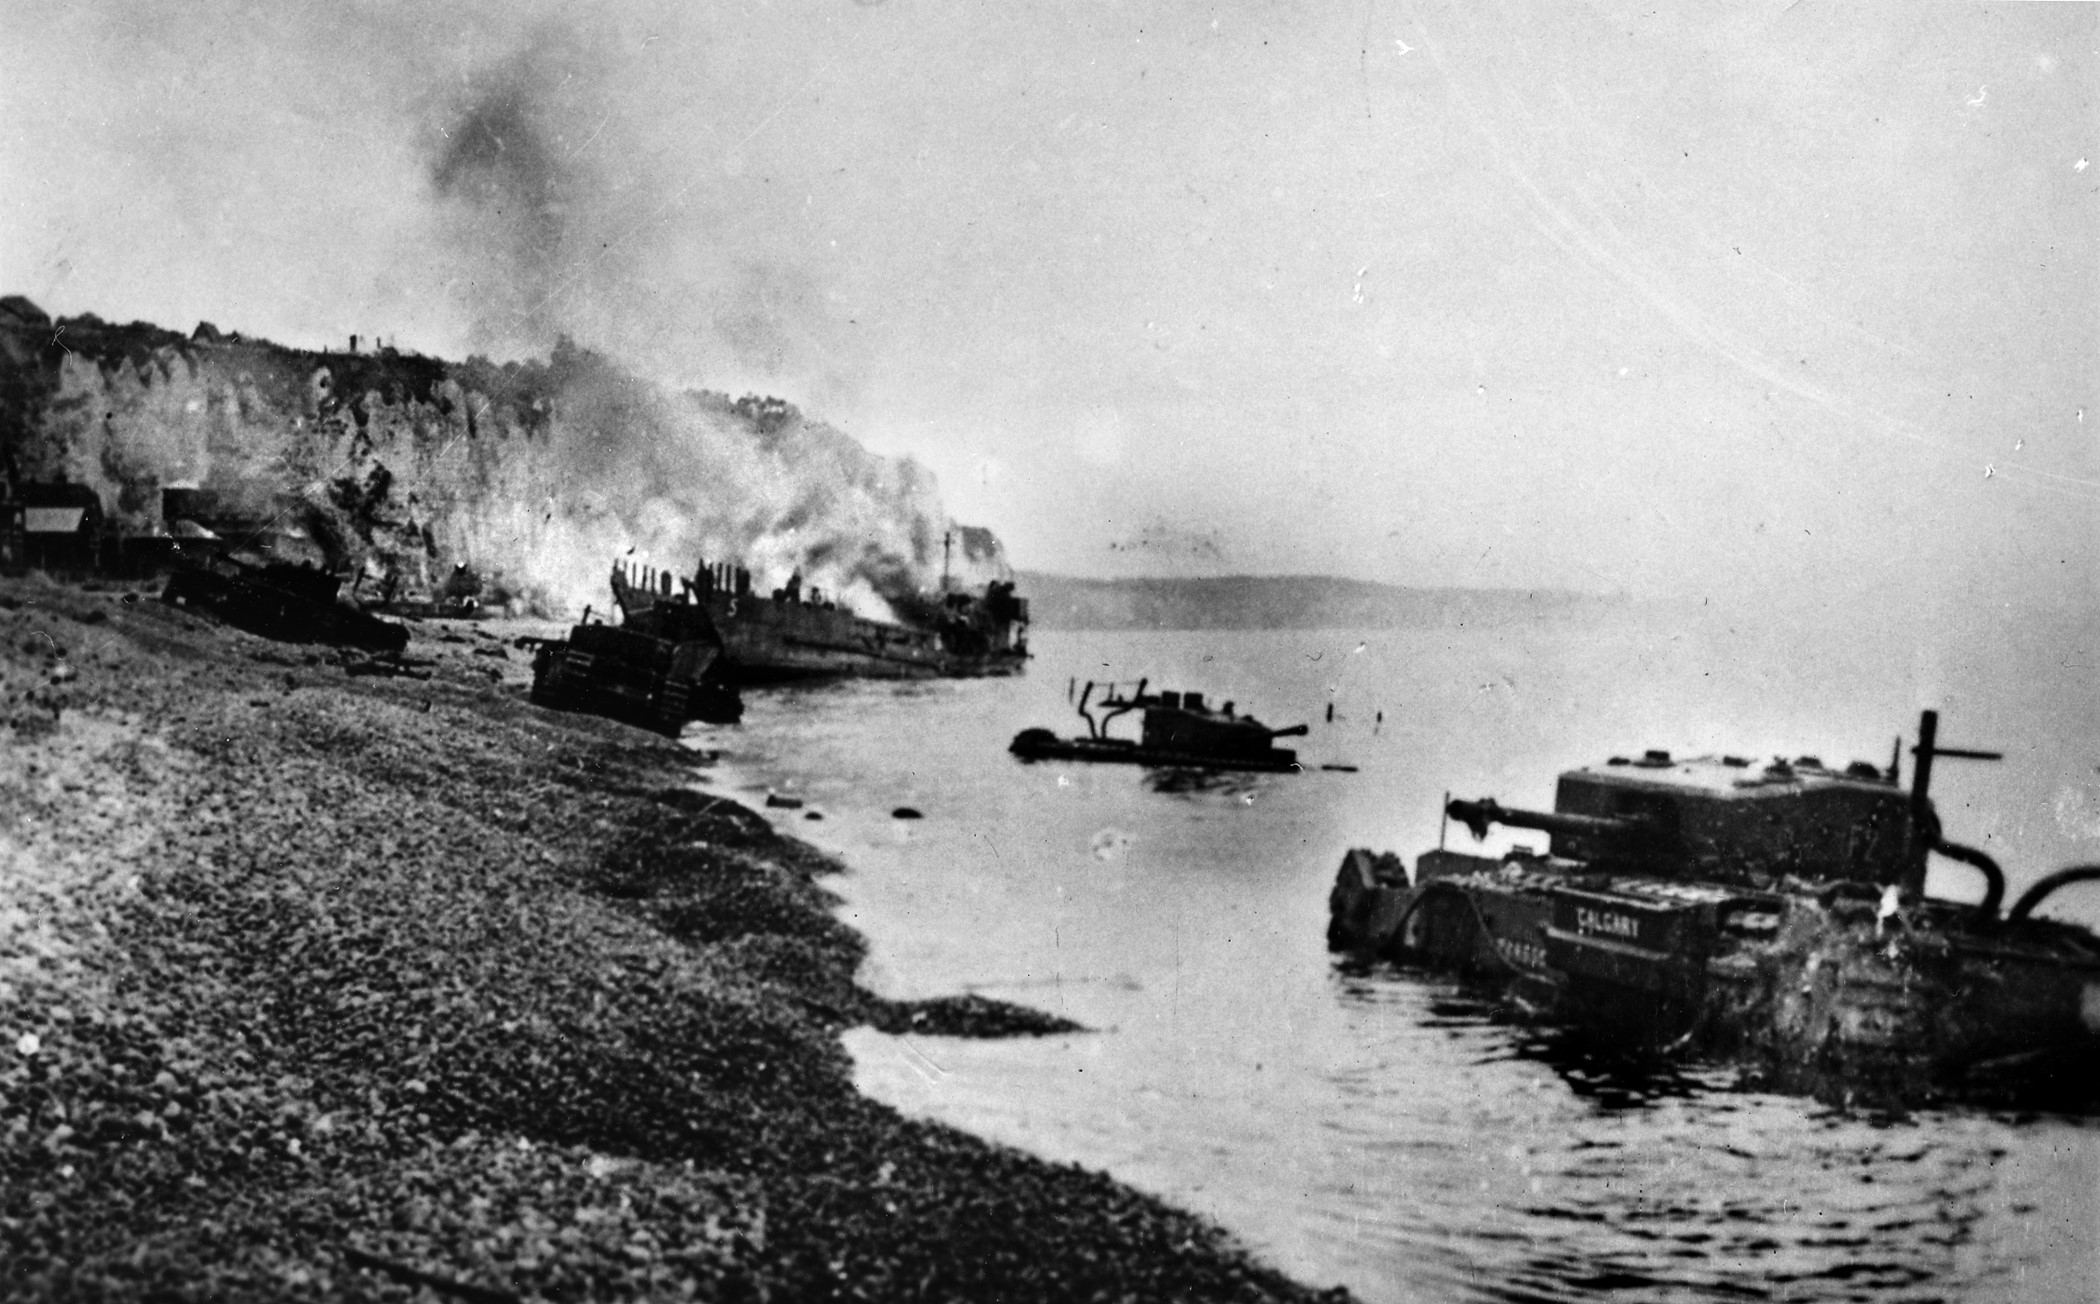 Burning tanks and casualties on Red Beach, Dieppe on August 19, 1942.  Photo courtesy of the family of the late Irvin Snyder.